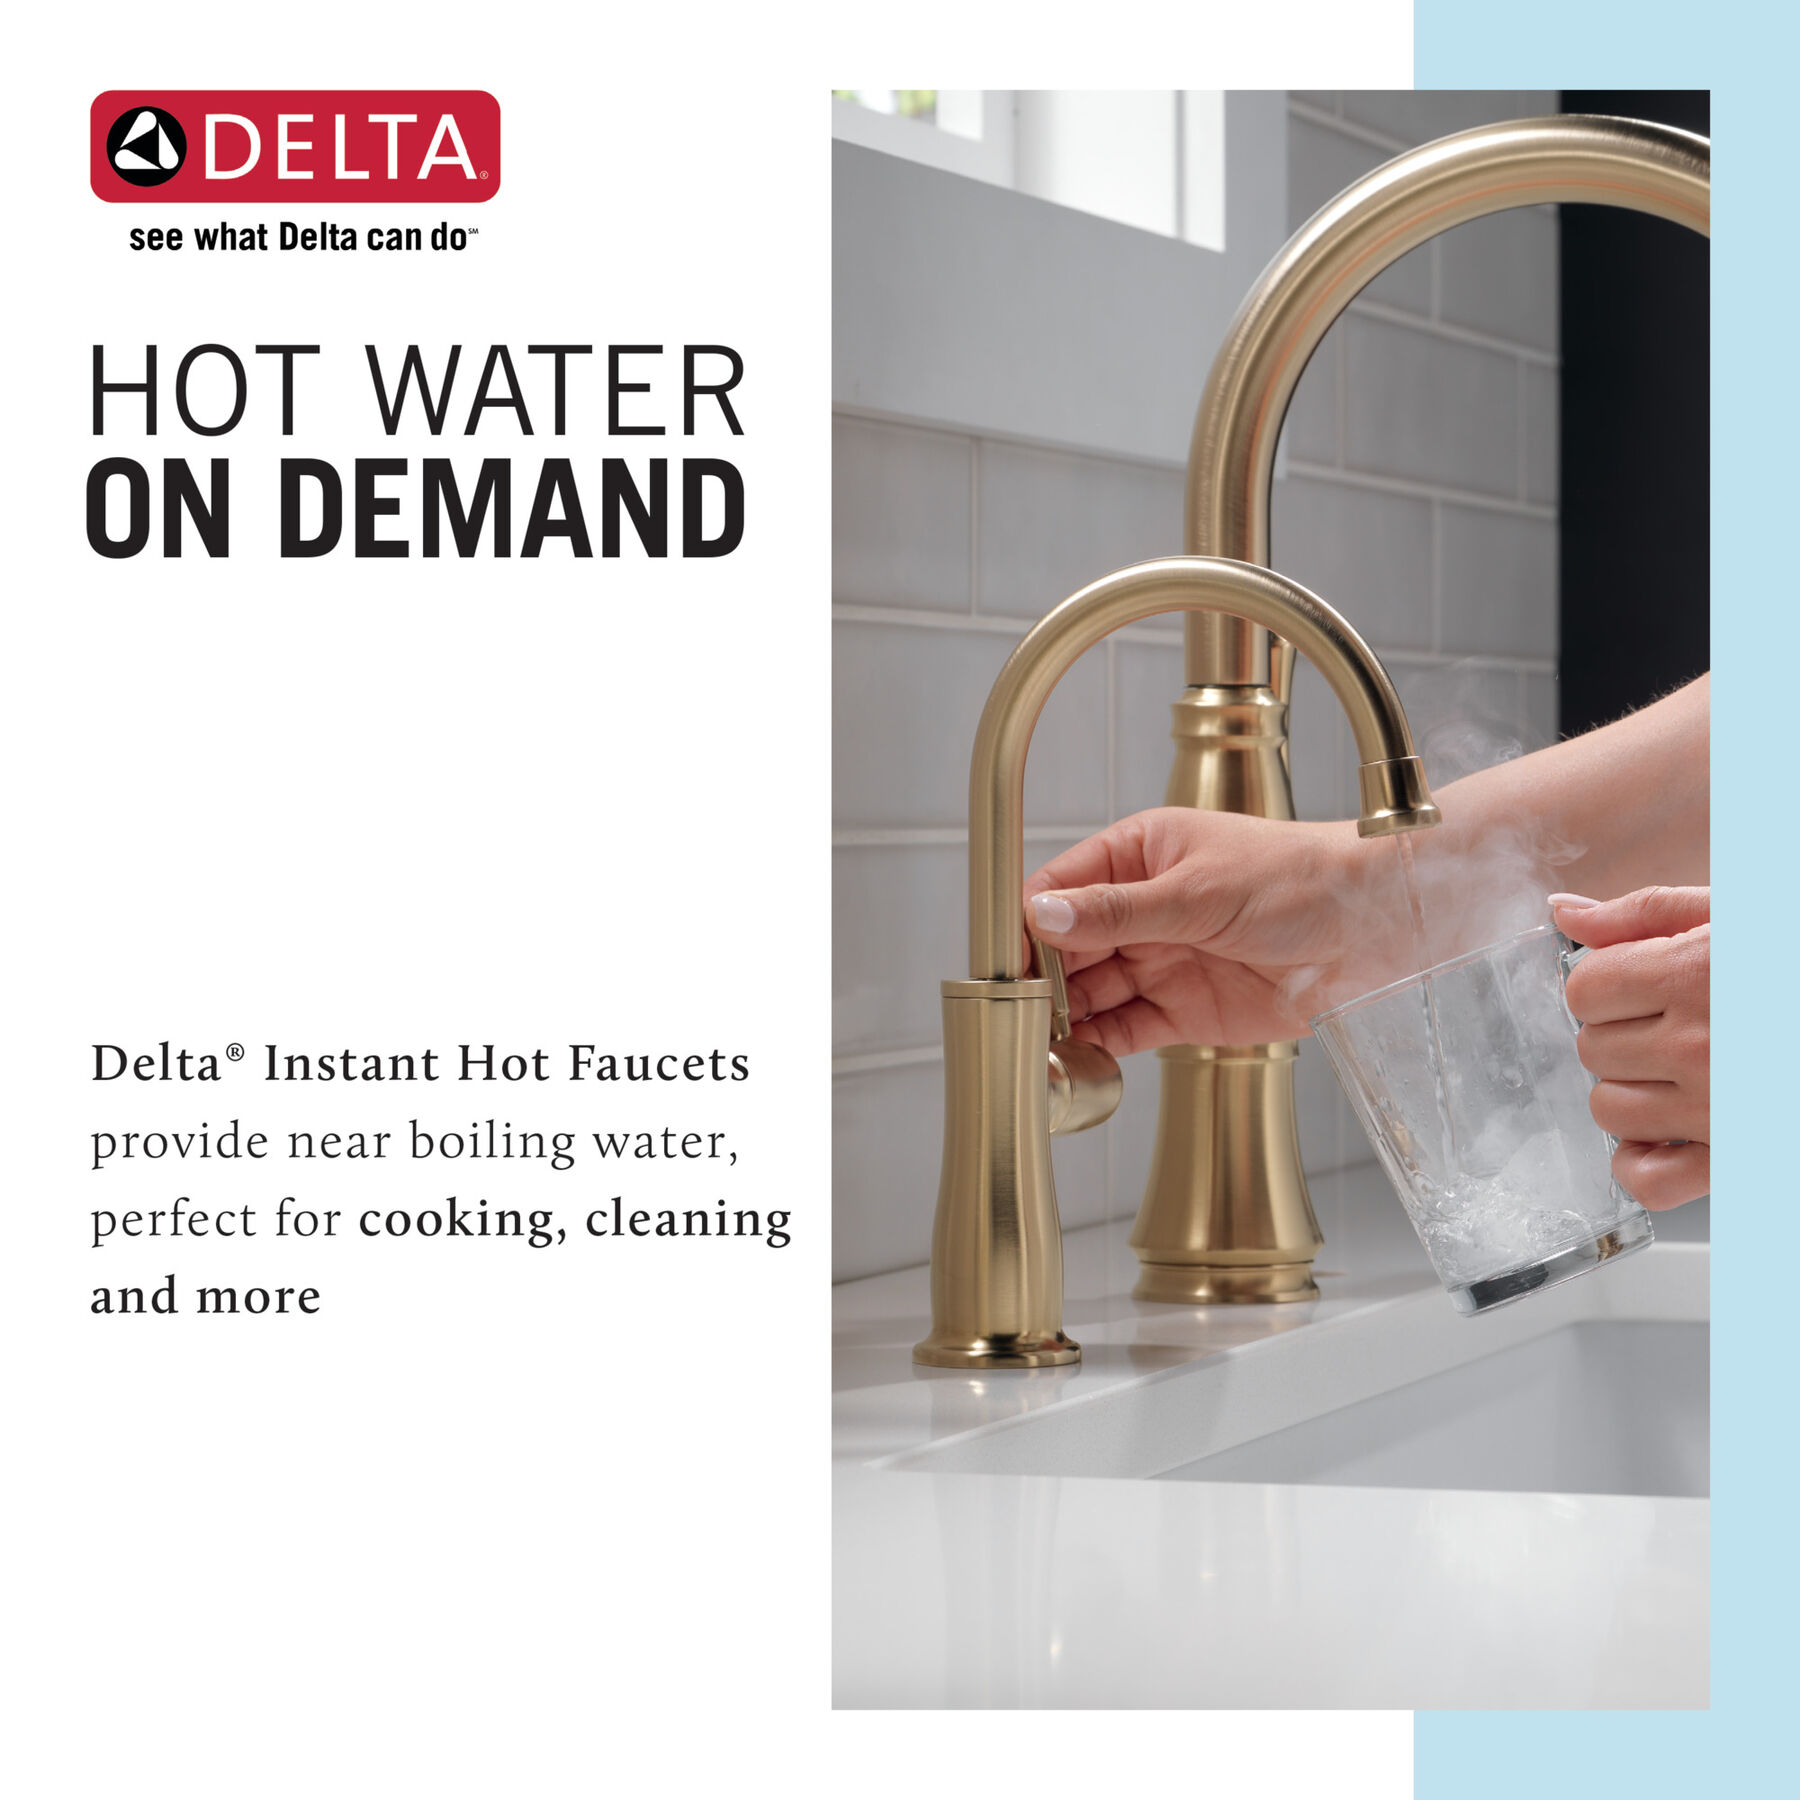 Home Q&A: What's the difference between a boiler tap and a hot water  dispenser?